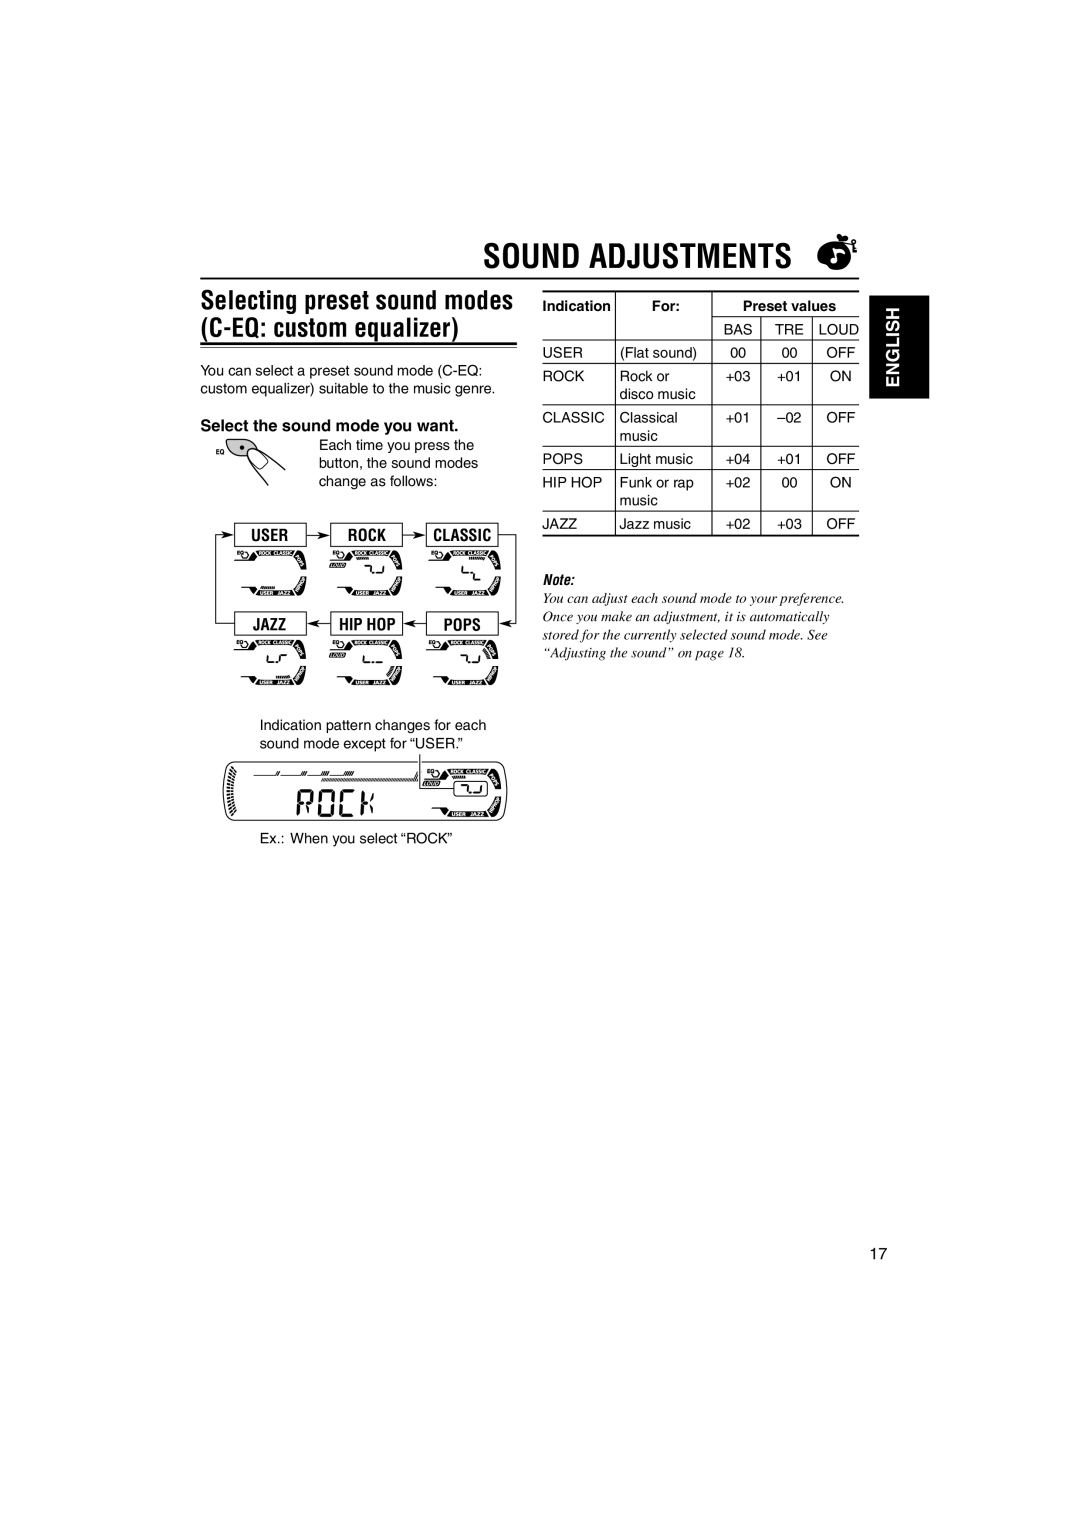 JVC KD-G210 Sound Adjustments, Select the sound mode you want, User Rock Classic, Jazz, Hip Hop, Pops, English, Indication 